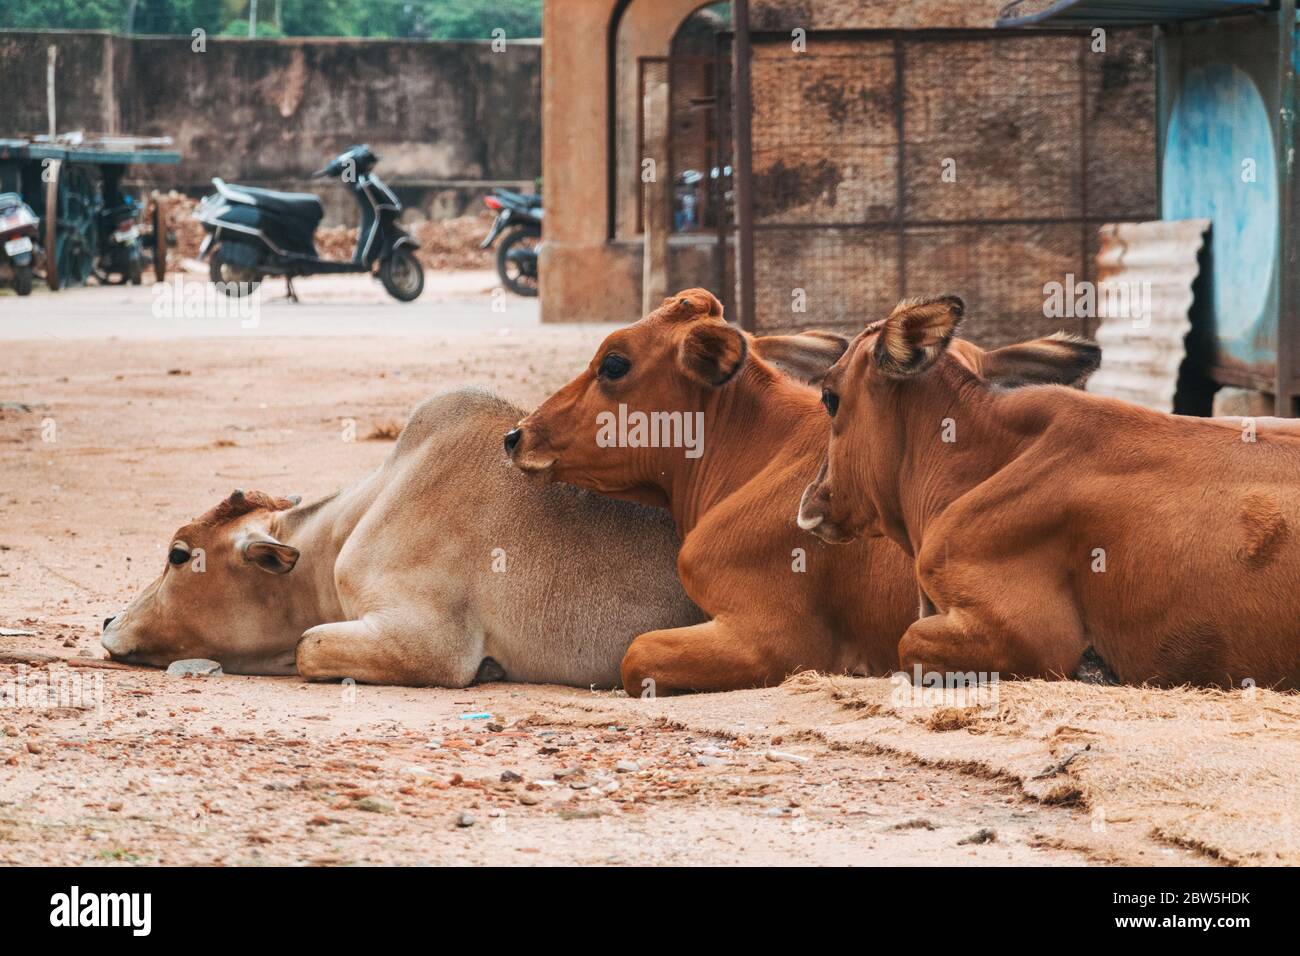 Three calves lie down together on a dirt road in Tamil Nadu, India Stock Photo